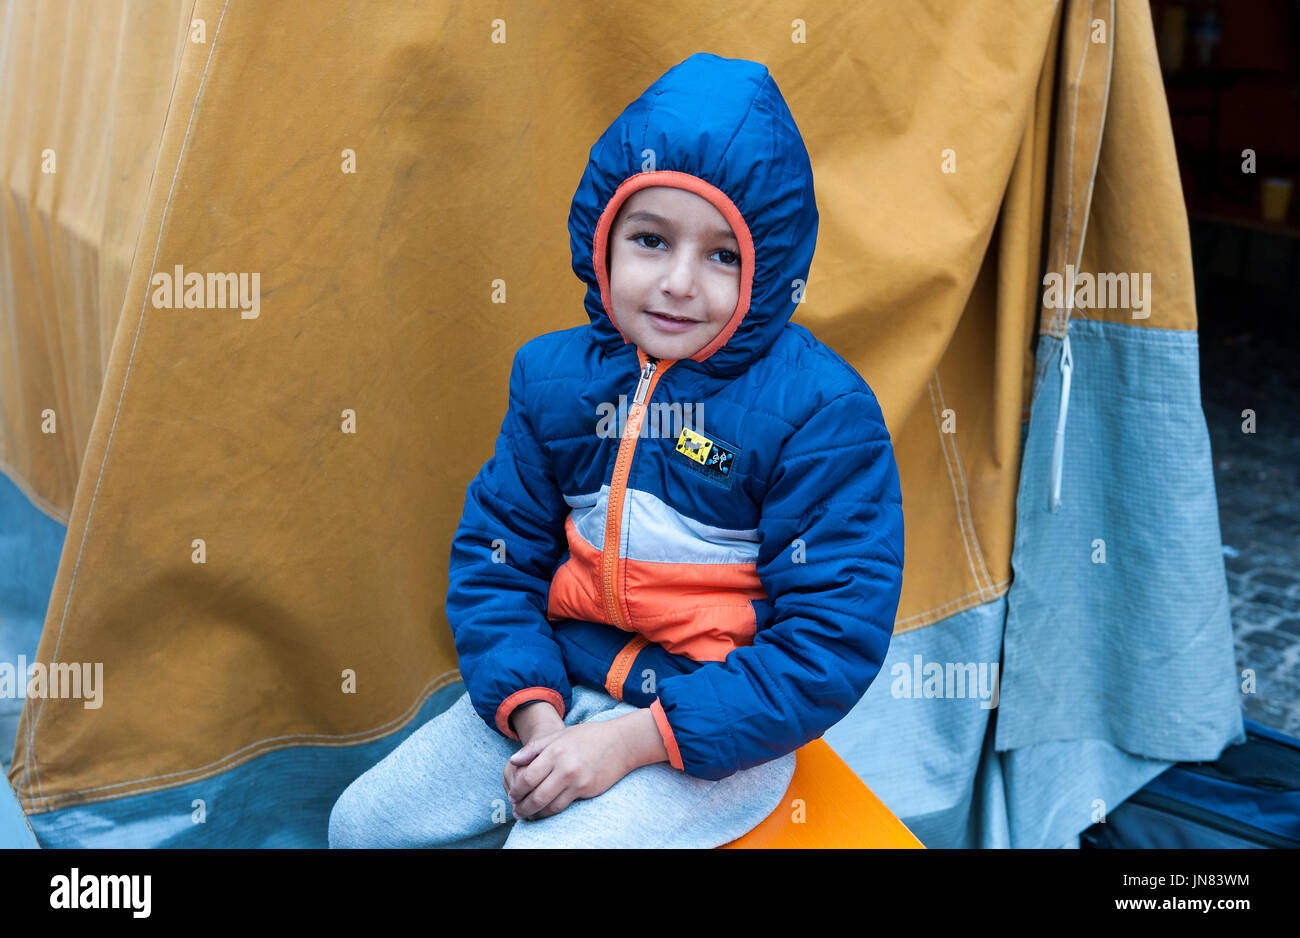 Munich, Germany -September 7th, 2015: Refugee child from Syria at Munich Central Station, Germany. Freezing and cold, but happy to be in safety. Stock Photo